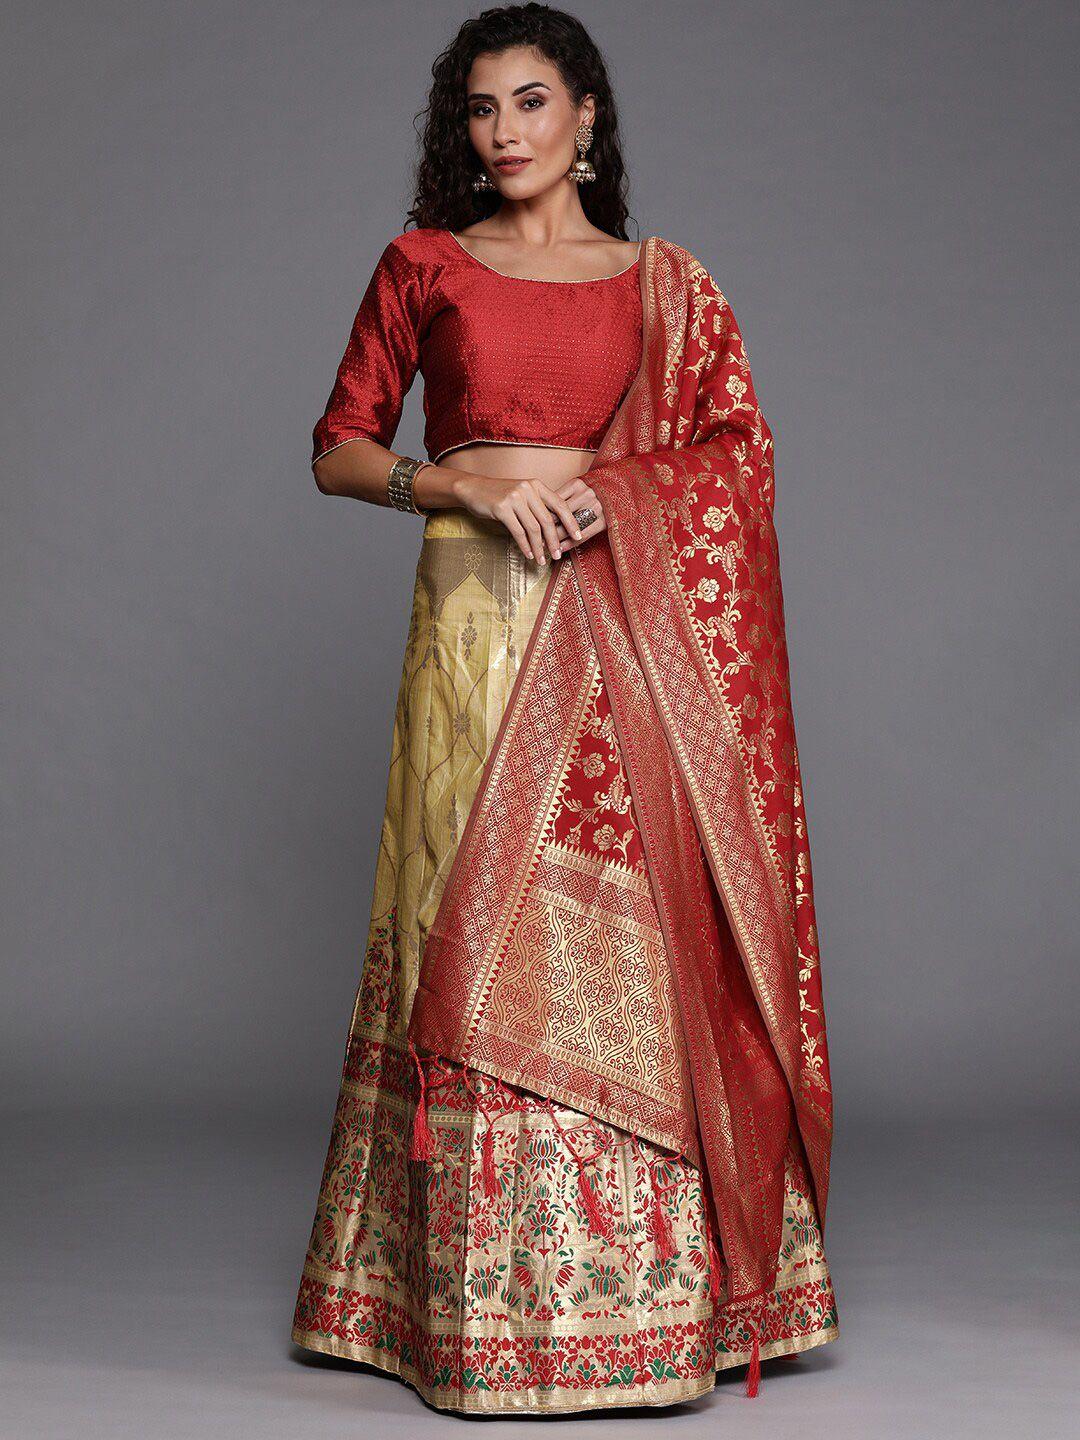 shadow & saining red & gold-toned semi-stitched lehenga unstitched blouse with dupatta